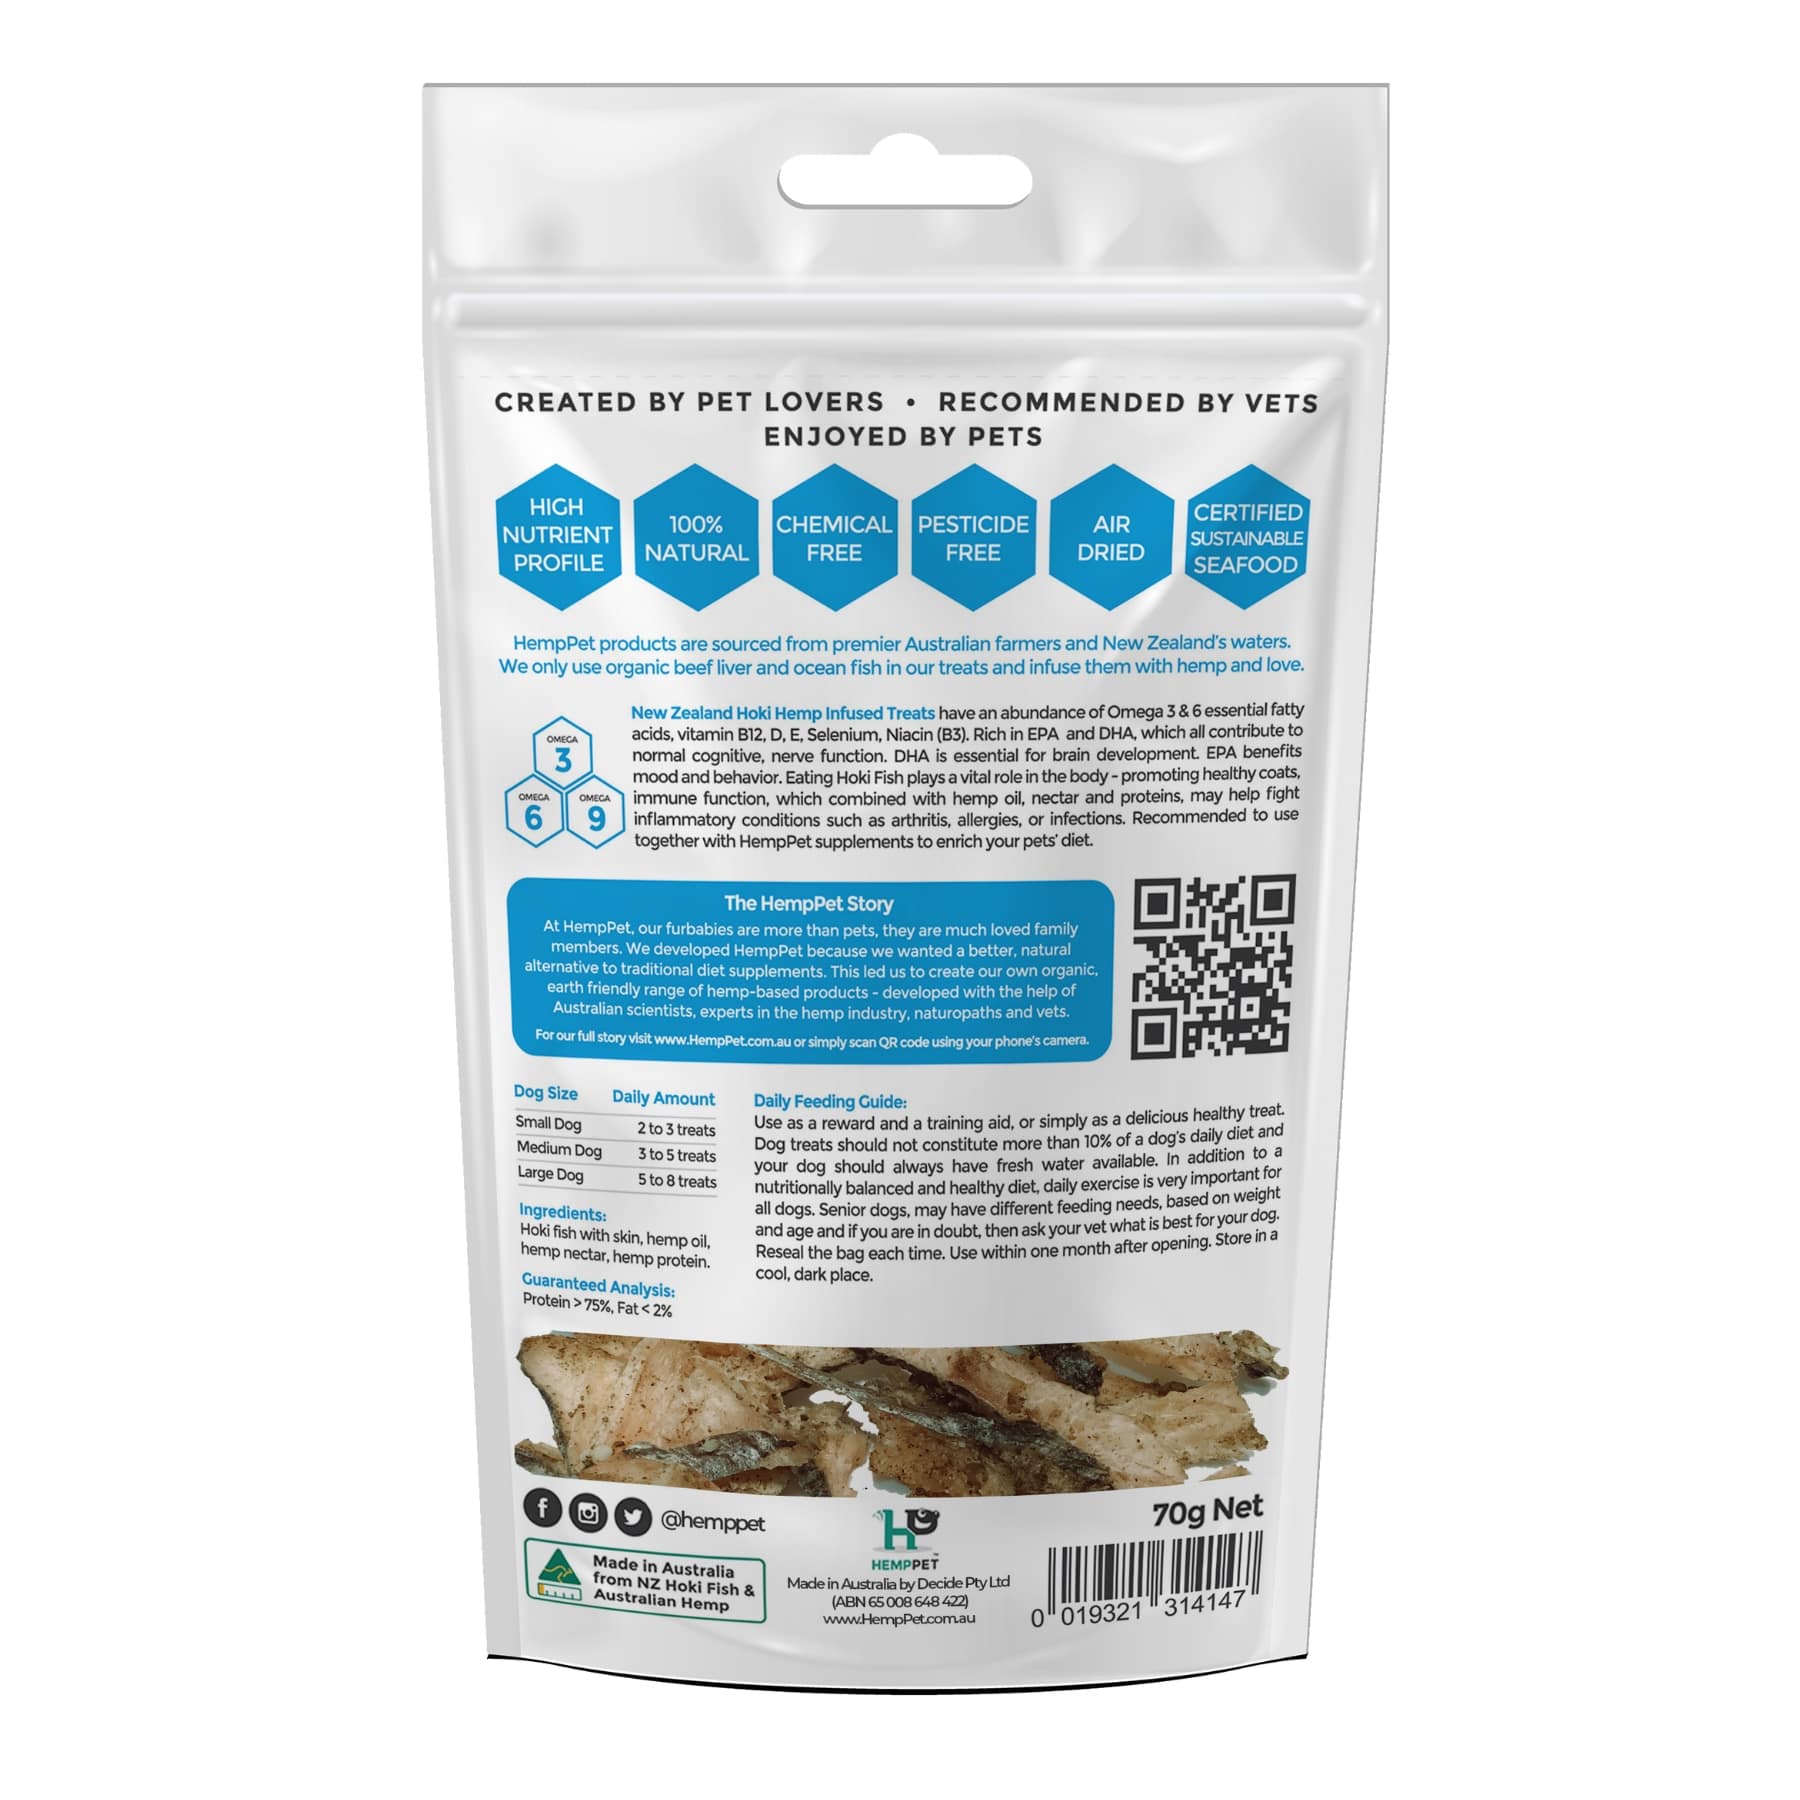 HEMP PET Infused Hoki Fish Treats for Dogs. Recommended by Vets.